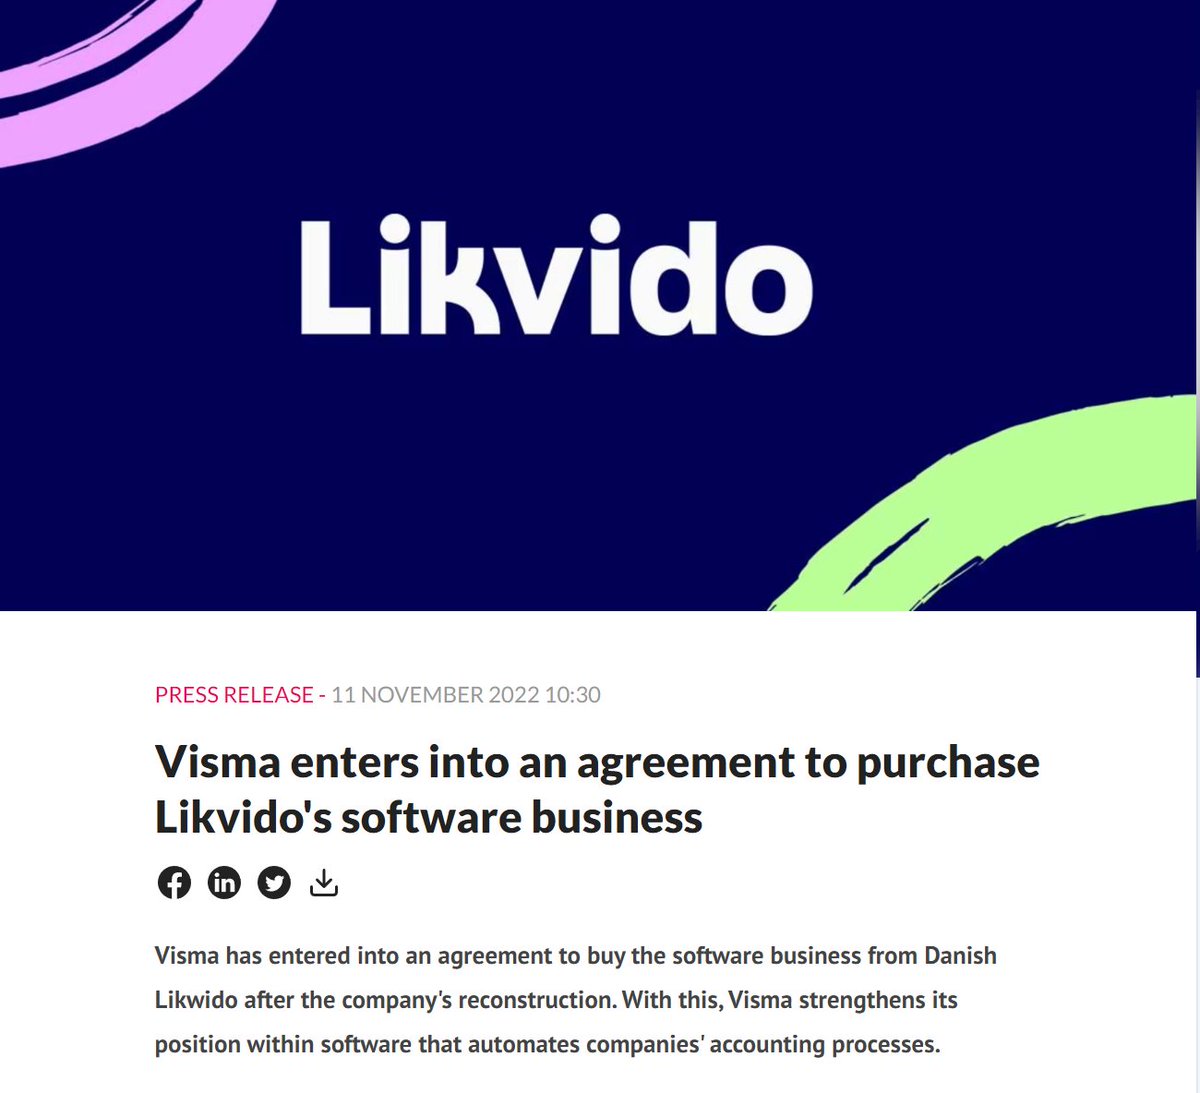 LIKVIDO HAS BECOME PART OF THE VISMA FAMILY! 5 years after starting Likvido - @maxfrimmer and I have just signed the papers to become part of @visma 1/5